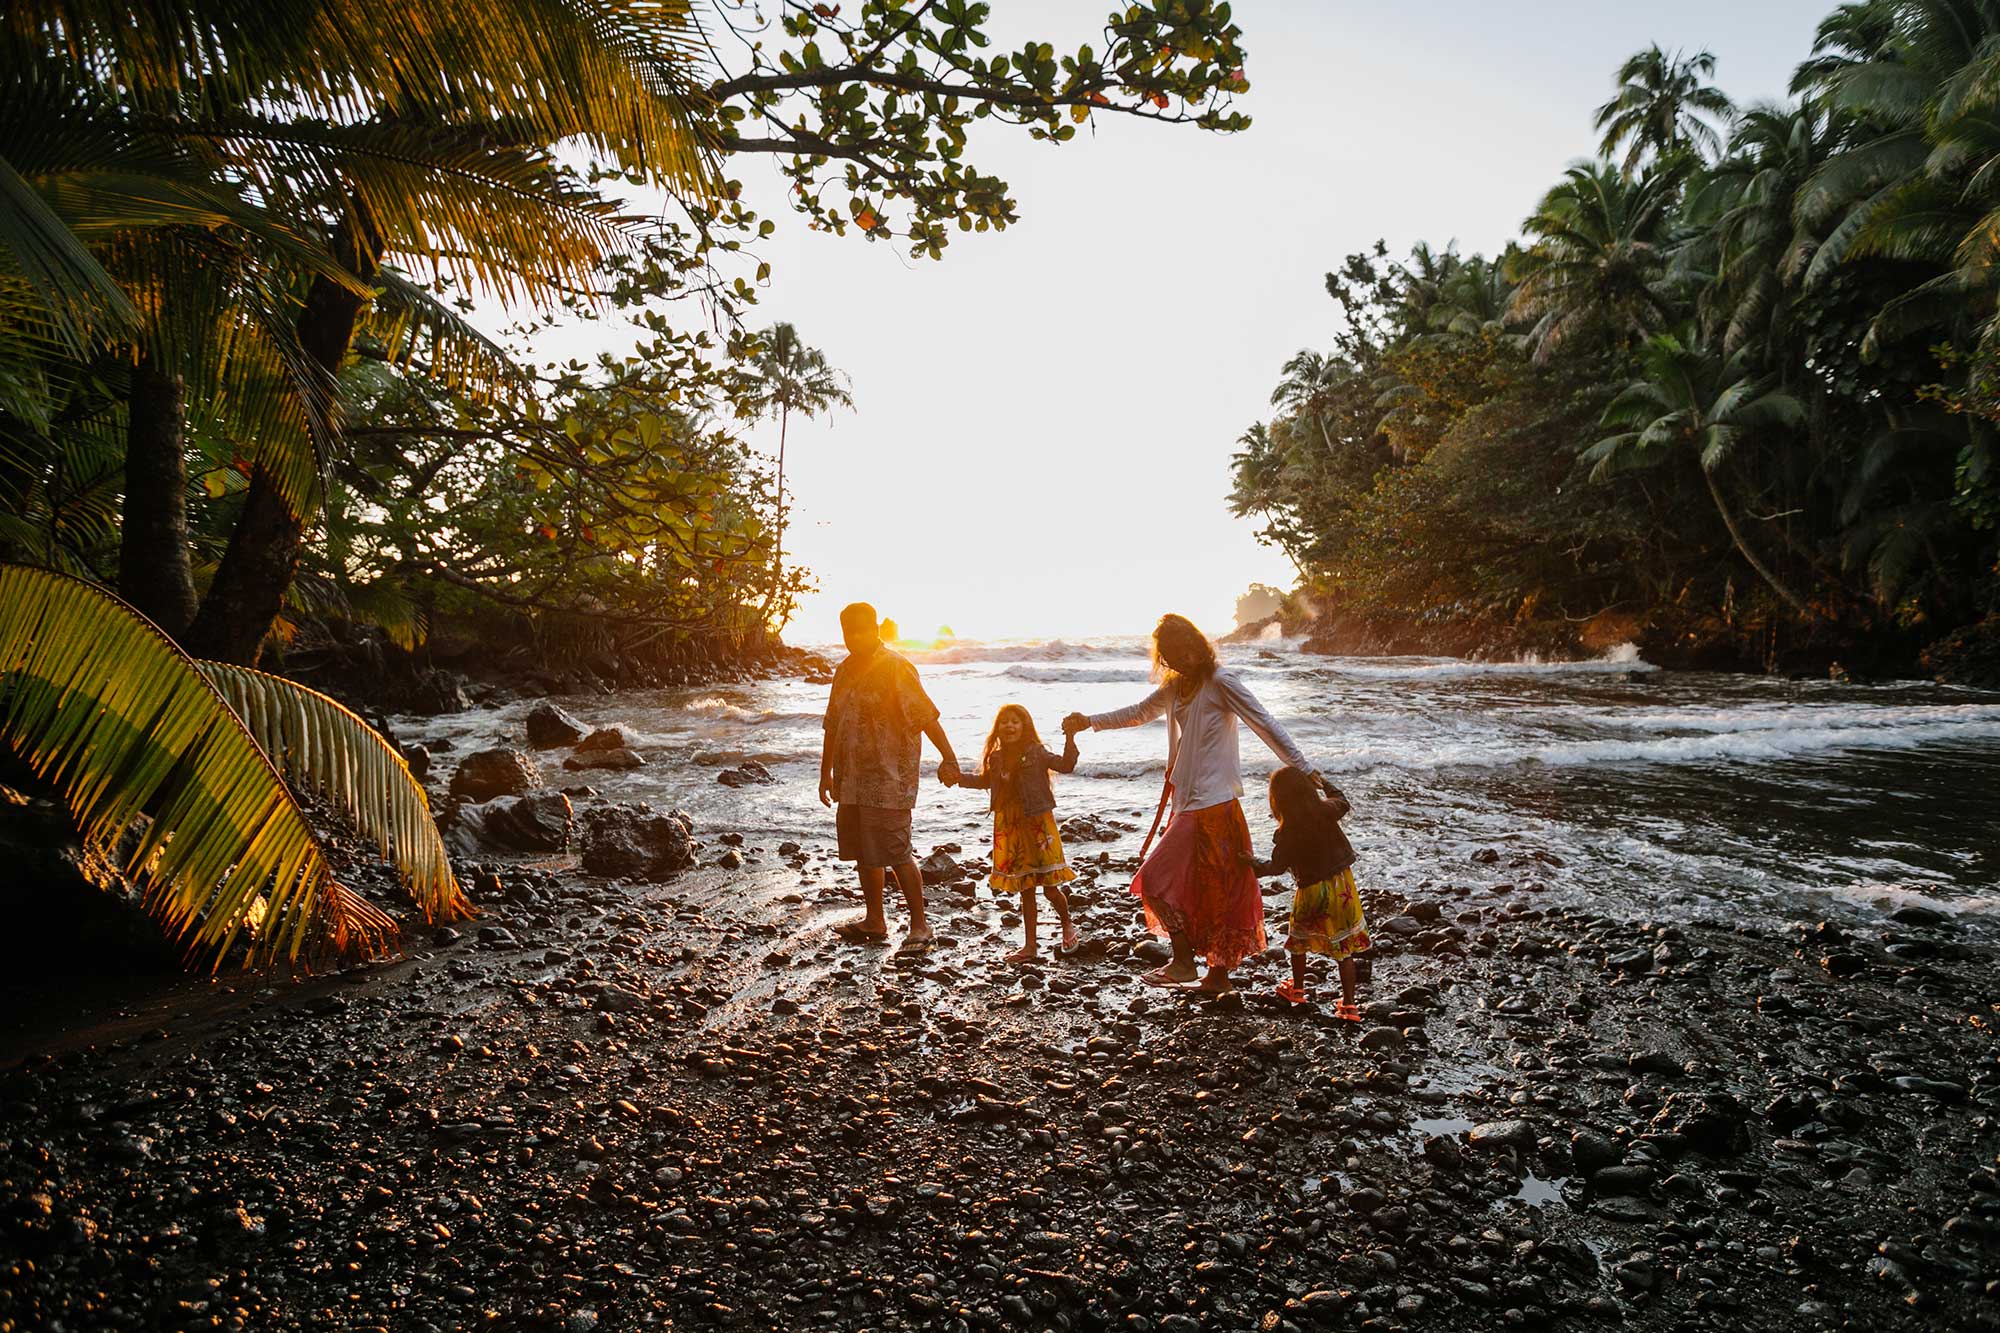 image of family of 4 walking together near the water